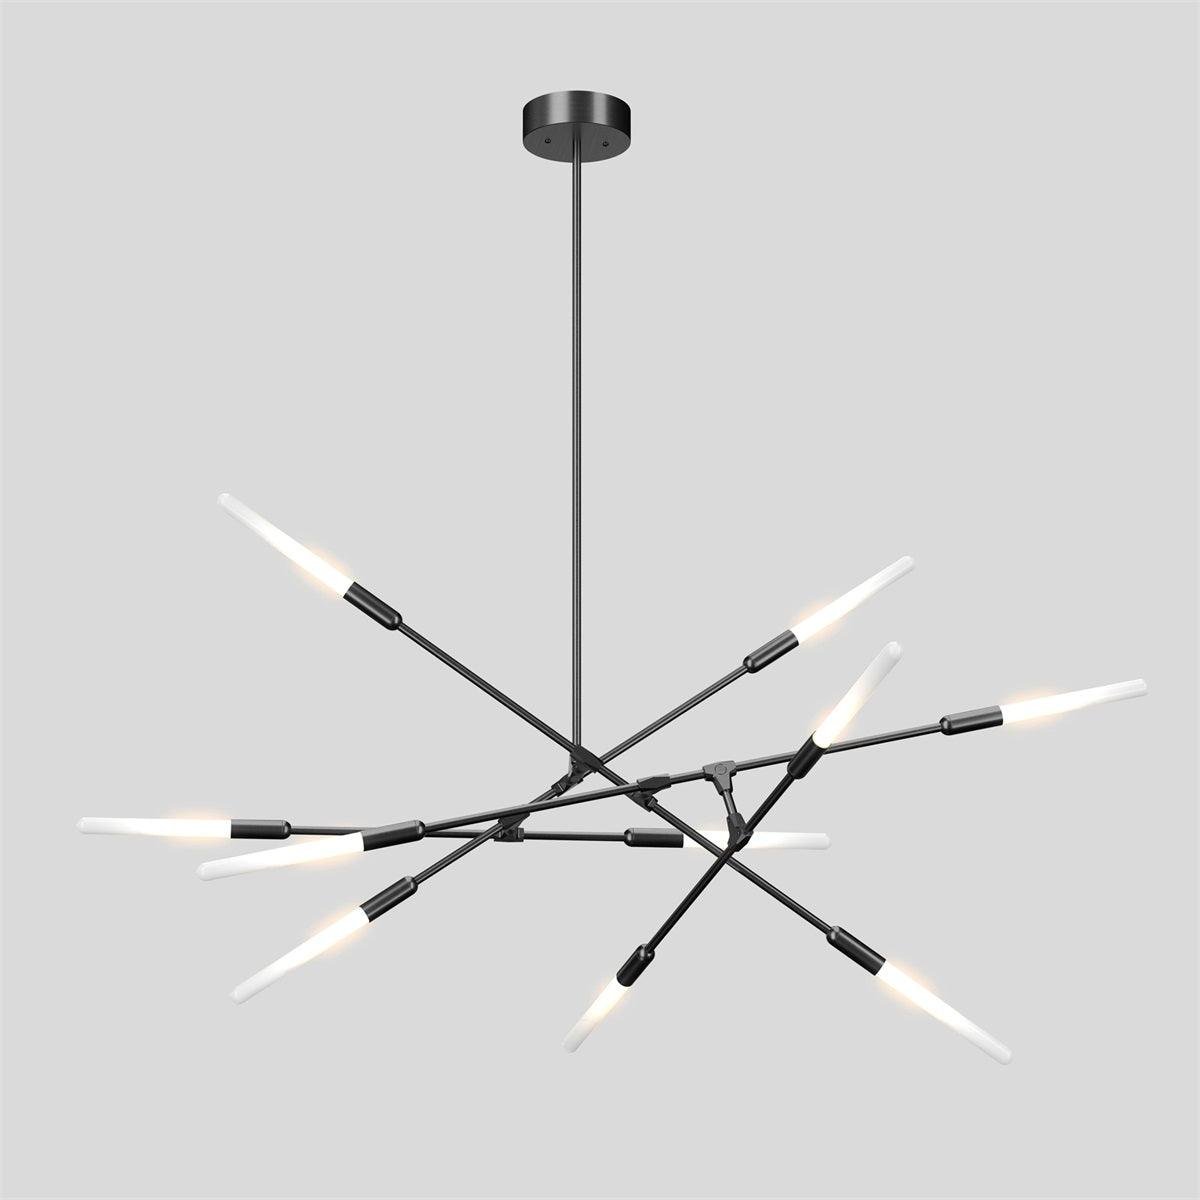 Black Dawn Chandeliers with 10heads in a Horizontal Design, measuring ∅ 59.1″ x H 31.5″